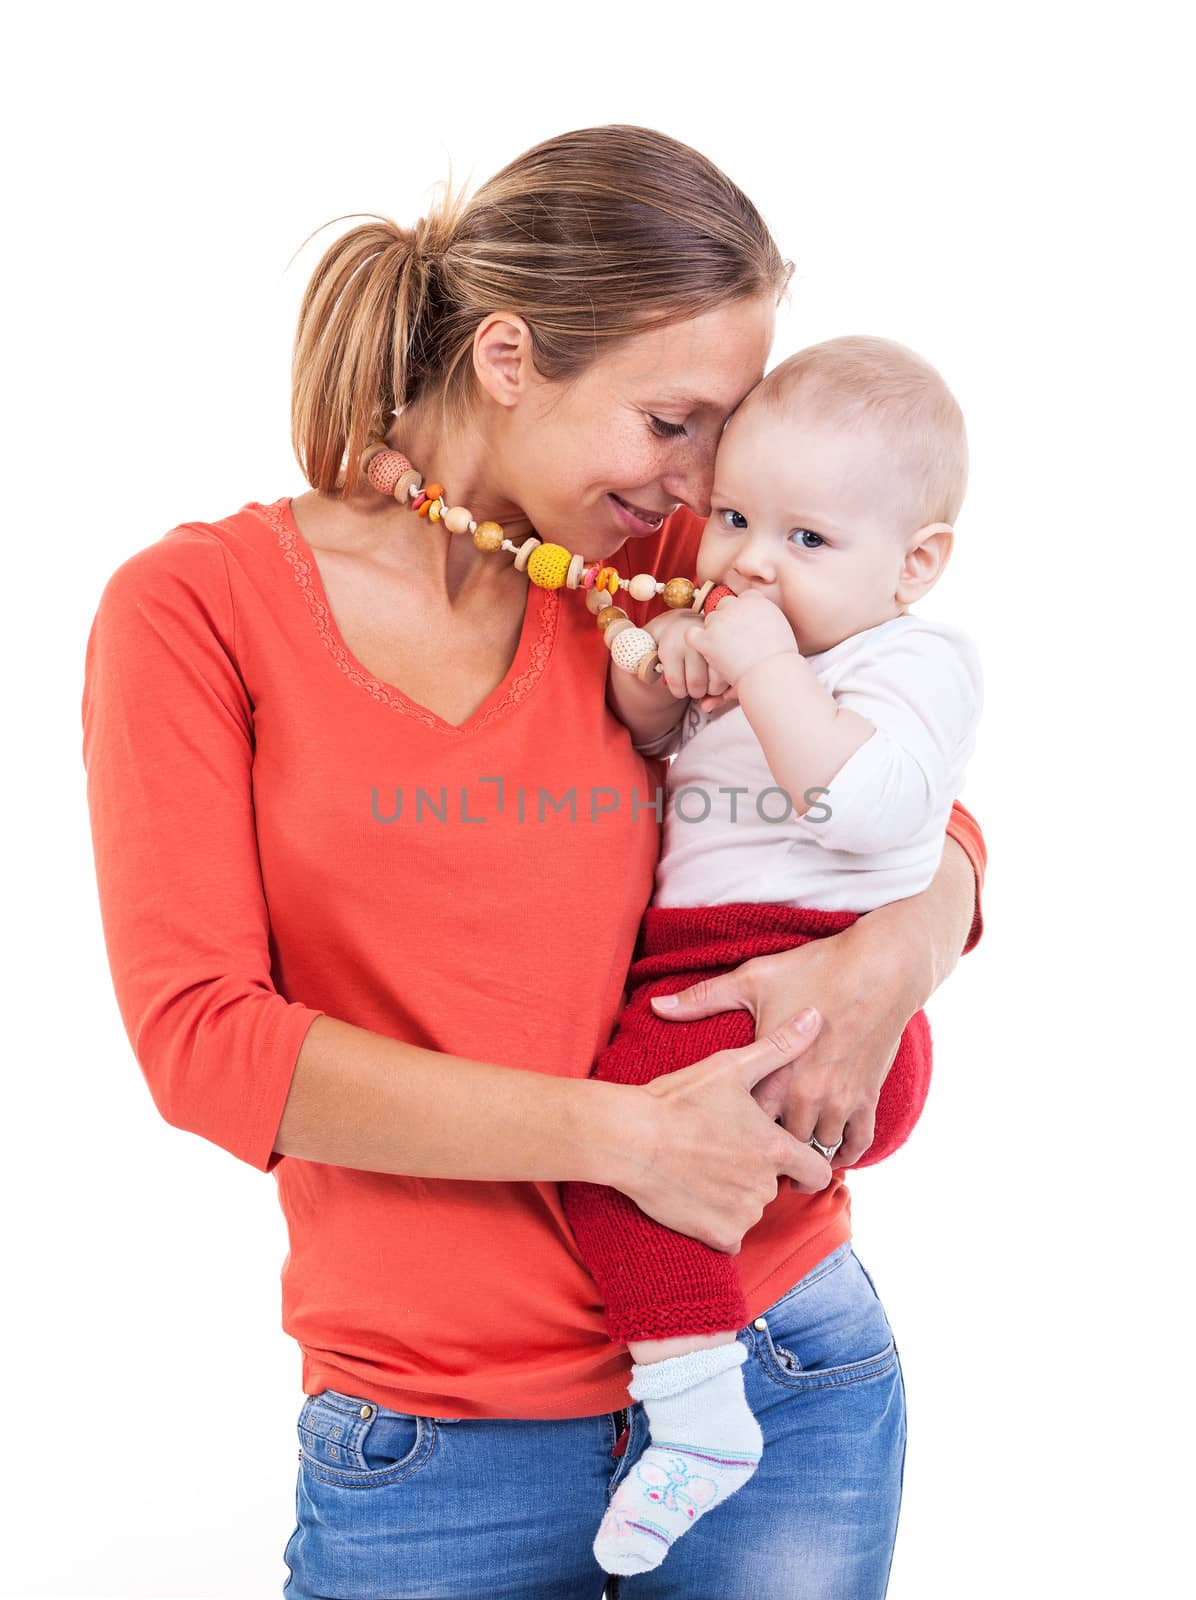 Young Caucasian woman and baby boy over white background